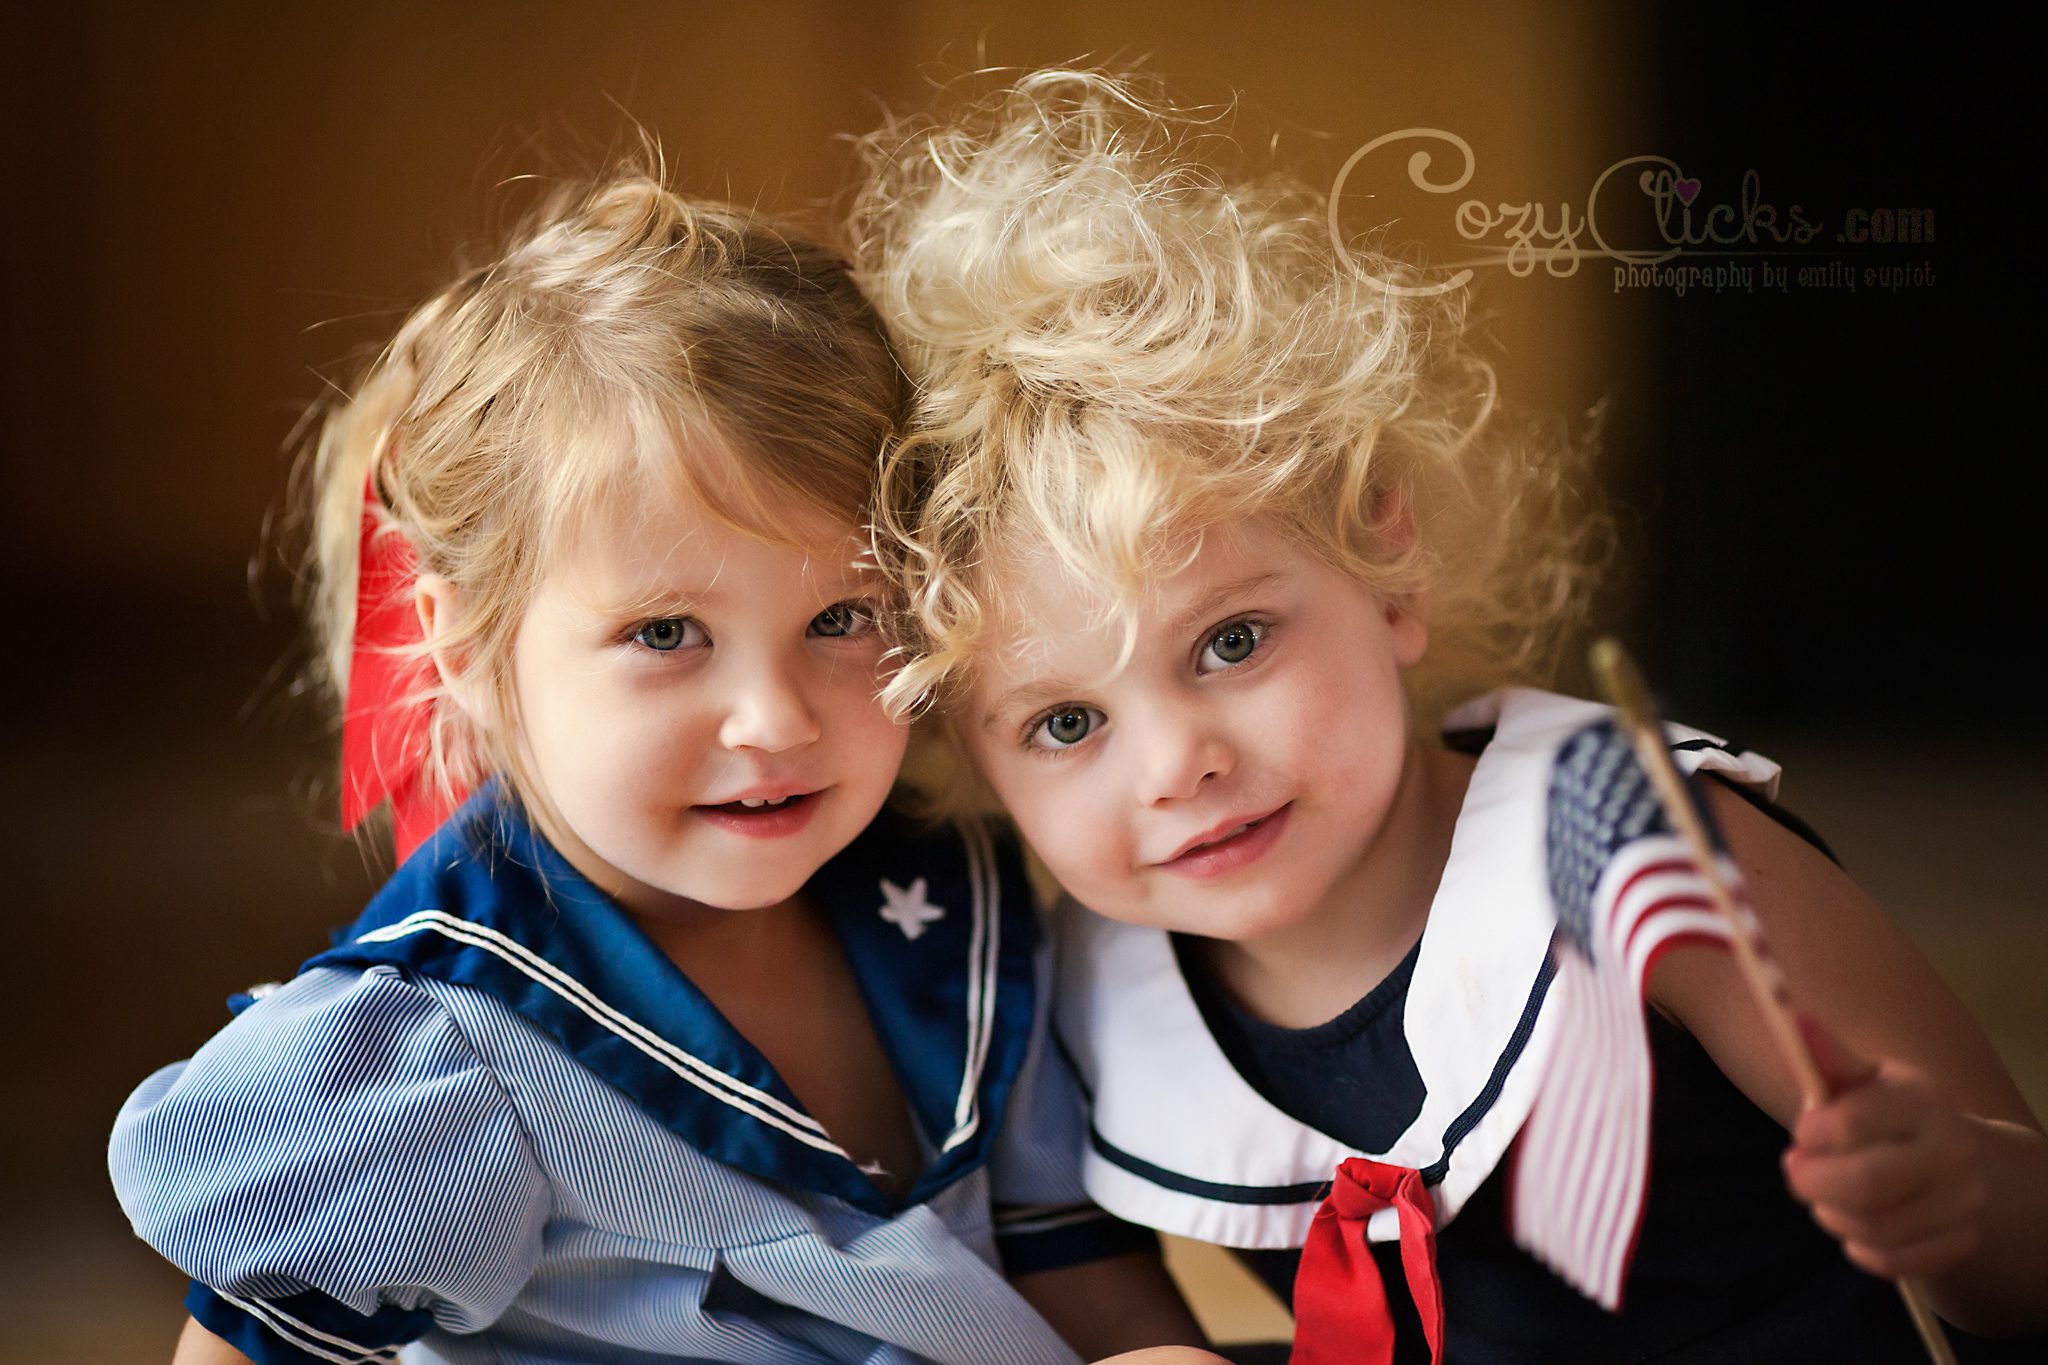 Ahwatukee photography on Studio for the Fourth of July themed photograph